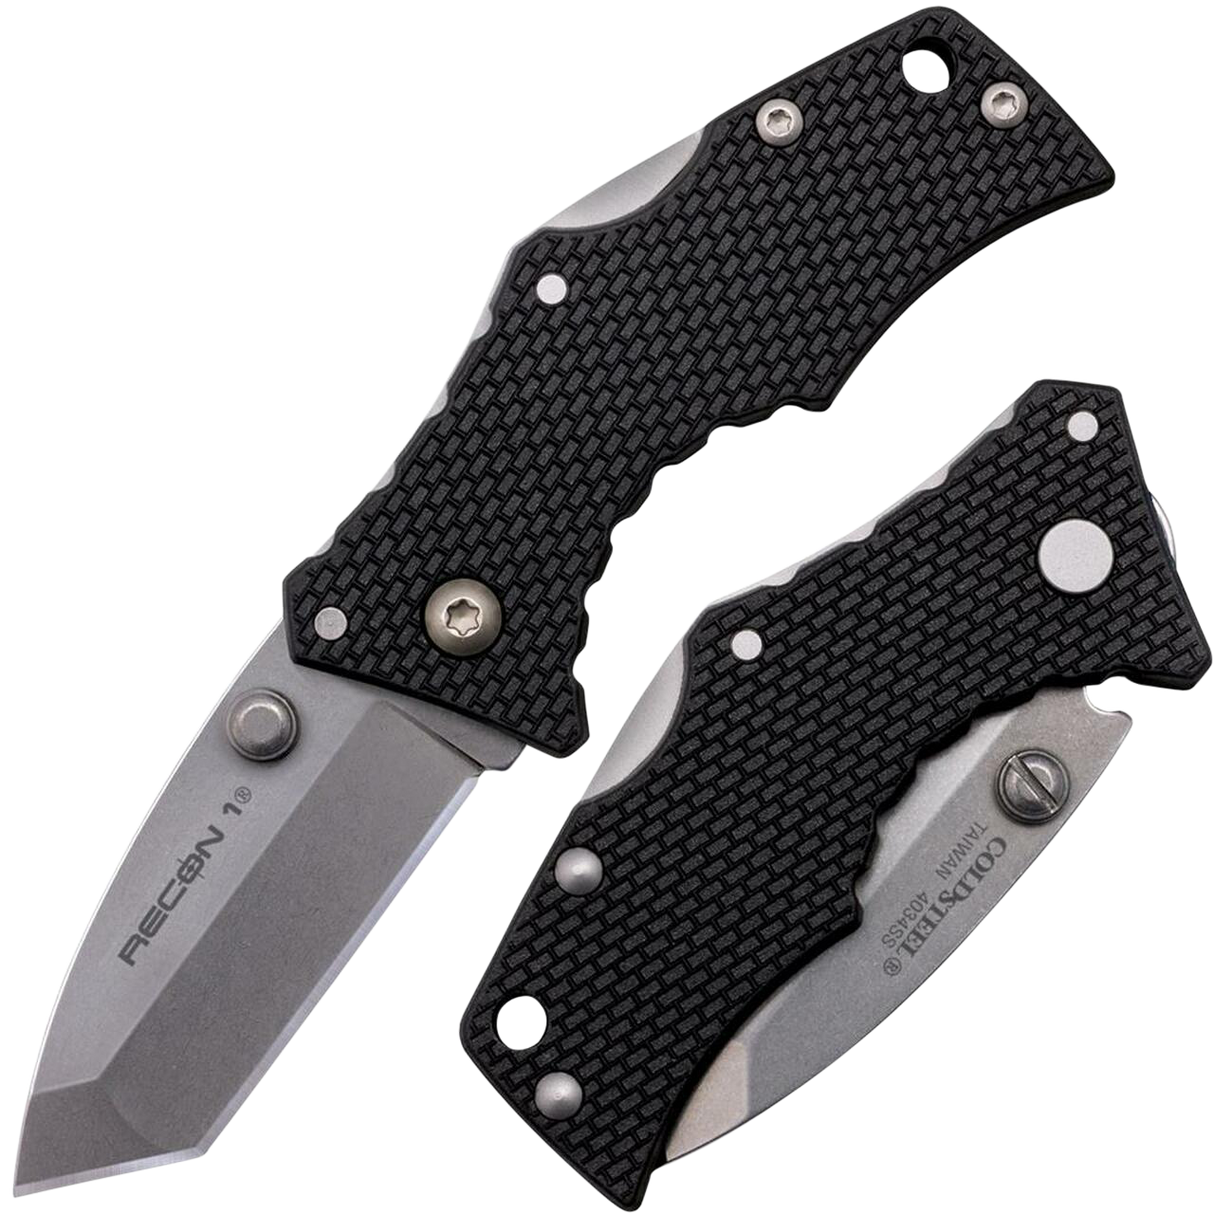 Cold Steel CS27DT Recon 1 Micro 2" Folding Tanto Plain Stonewashed 4034 SS Blade/ Black Griv-Ex Handle Includes Pocket Clip